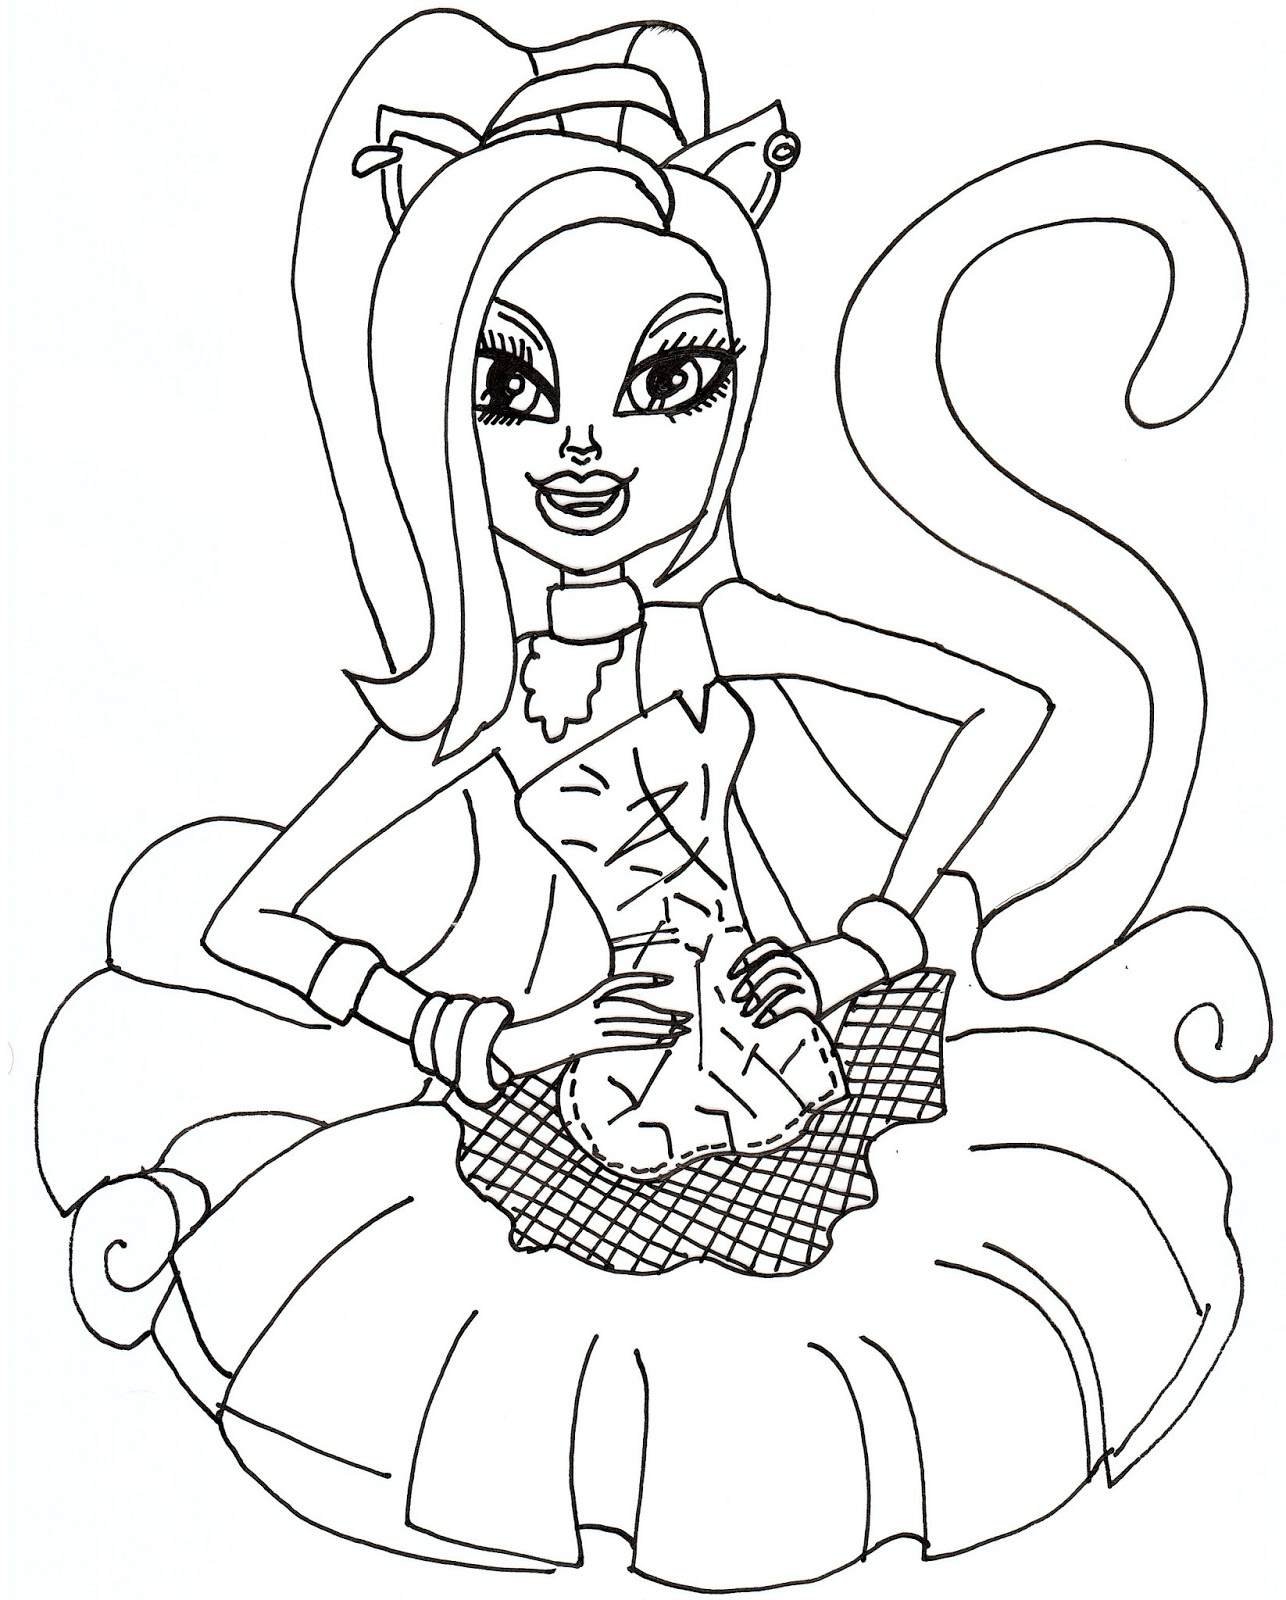 Catty Noir Coloring Page